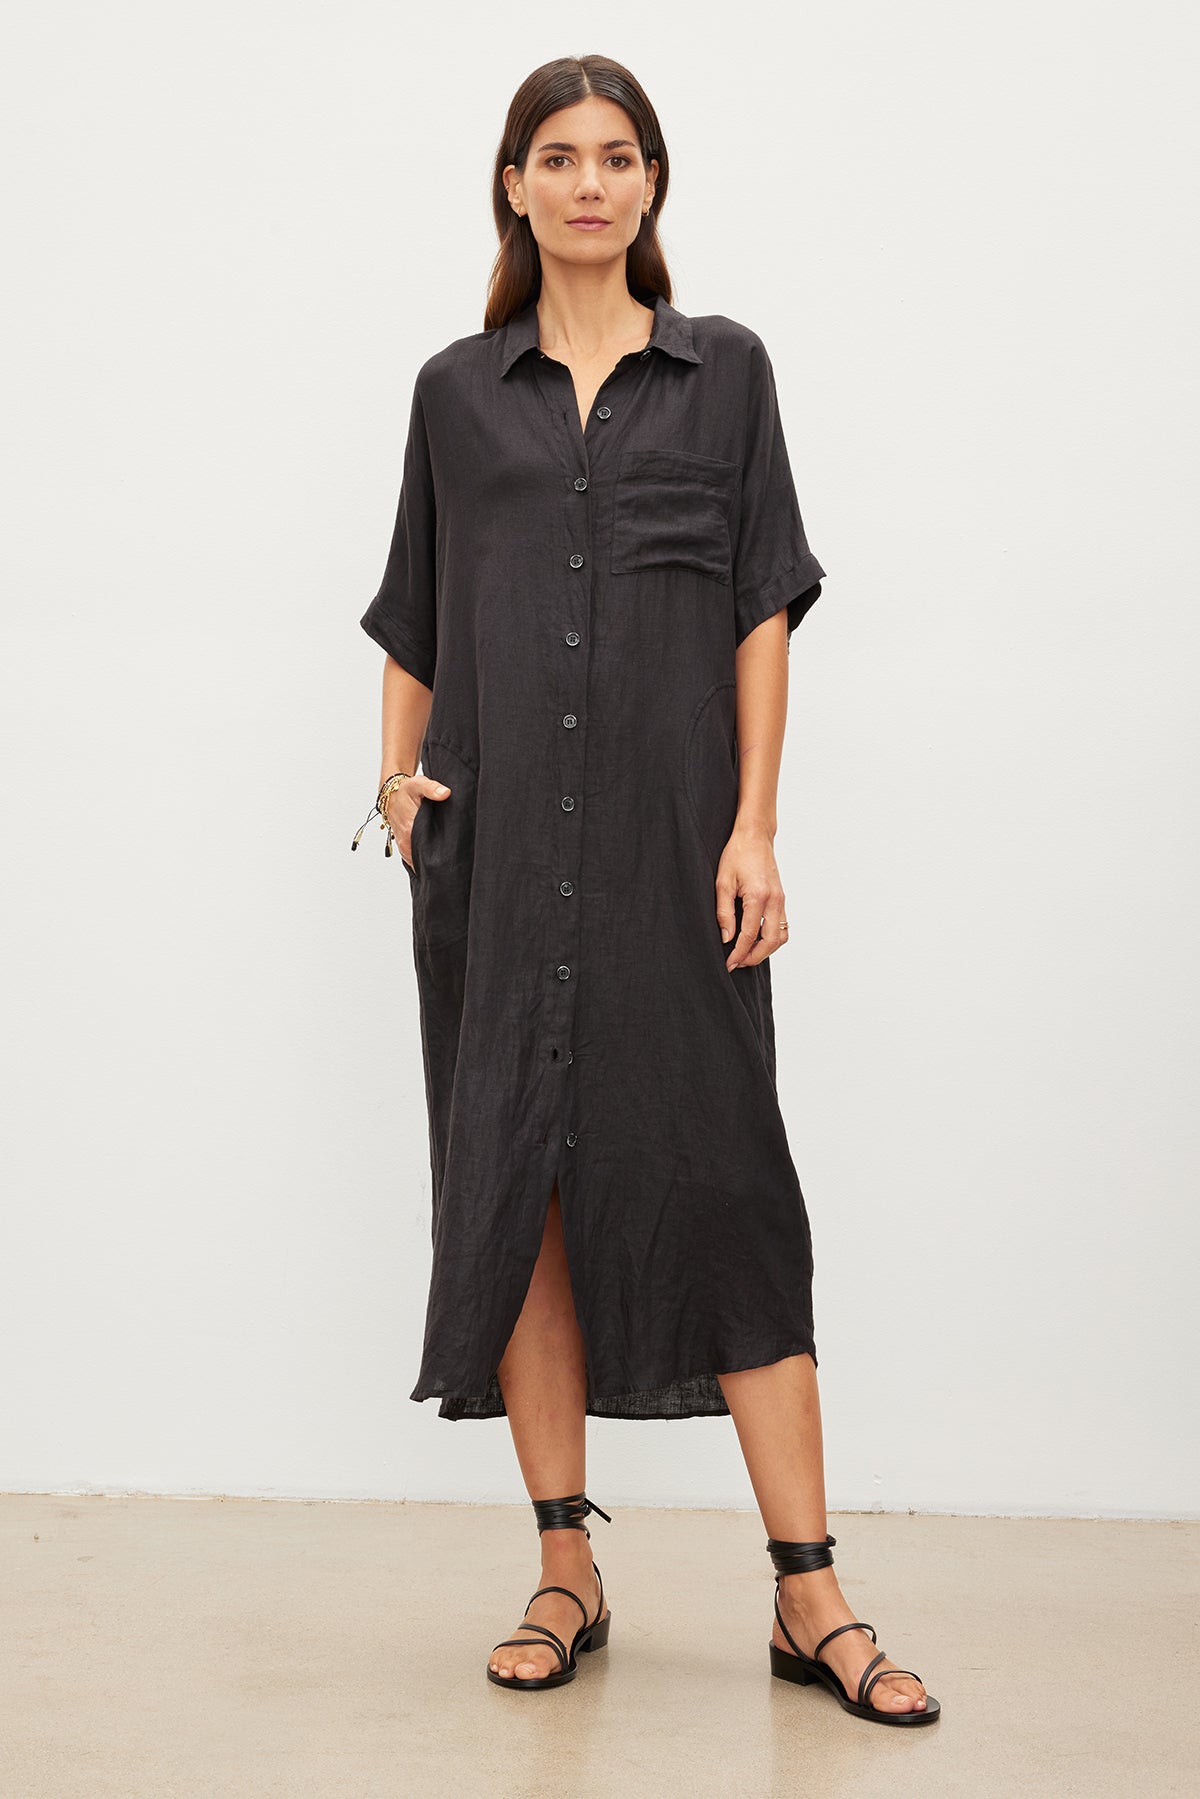 A woman standing in a studio, wearing a Velvet by Graham & Spencer SANDRA LINEN BUTTON-UP DRESS and black sandals, holding sunglasses in one hand.-35967717540033